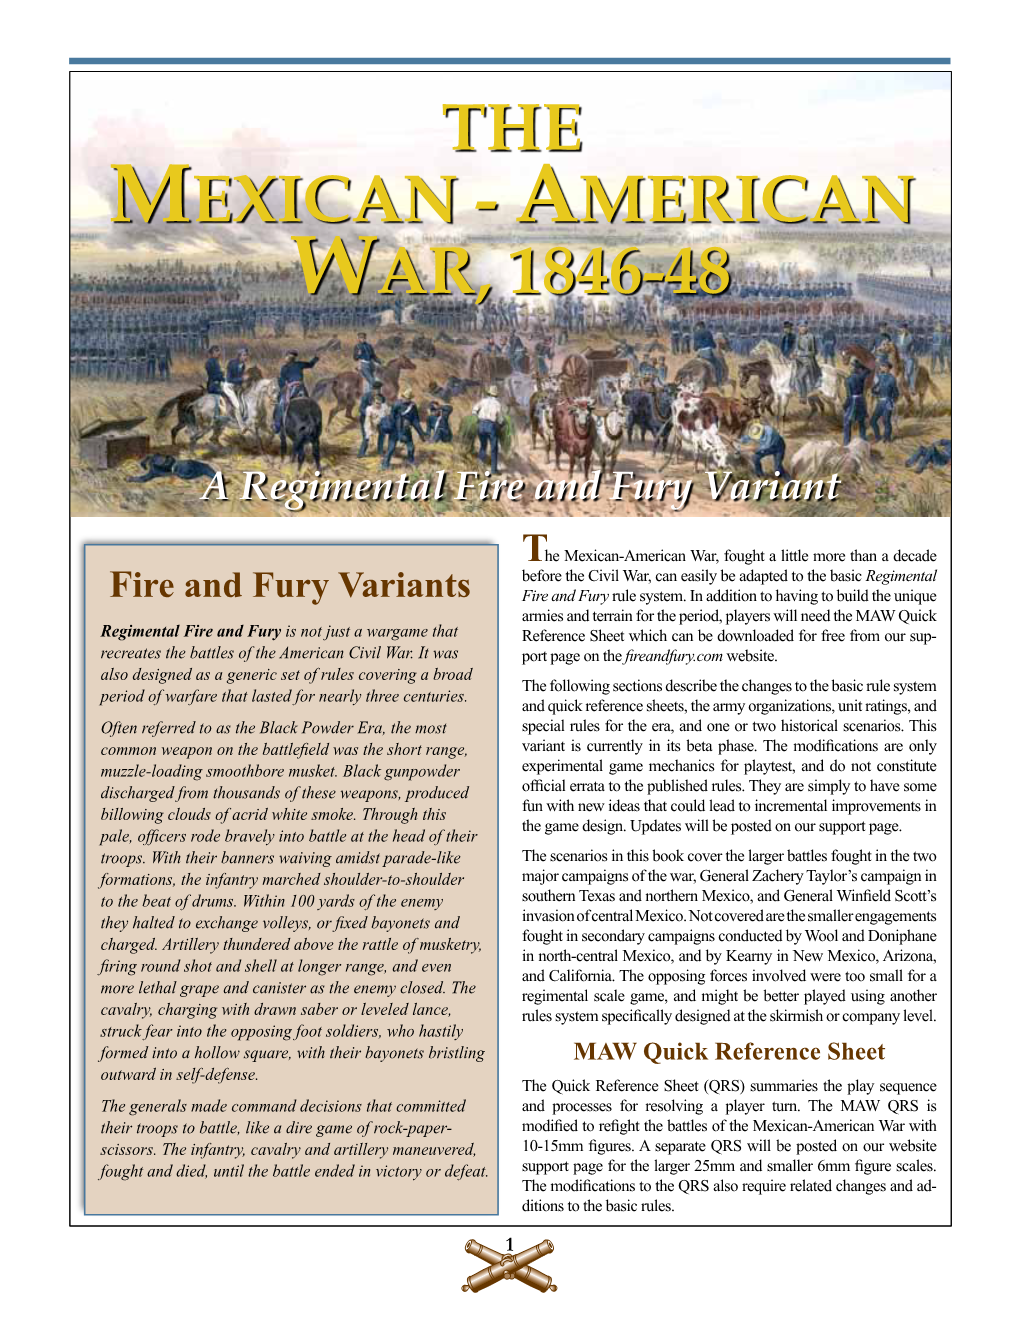 The Mexican - American War, 1846-48